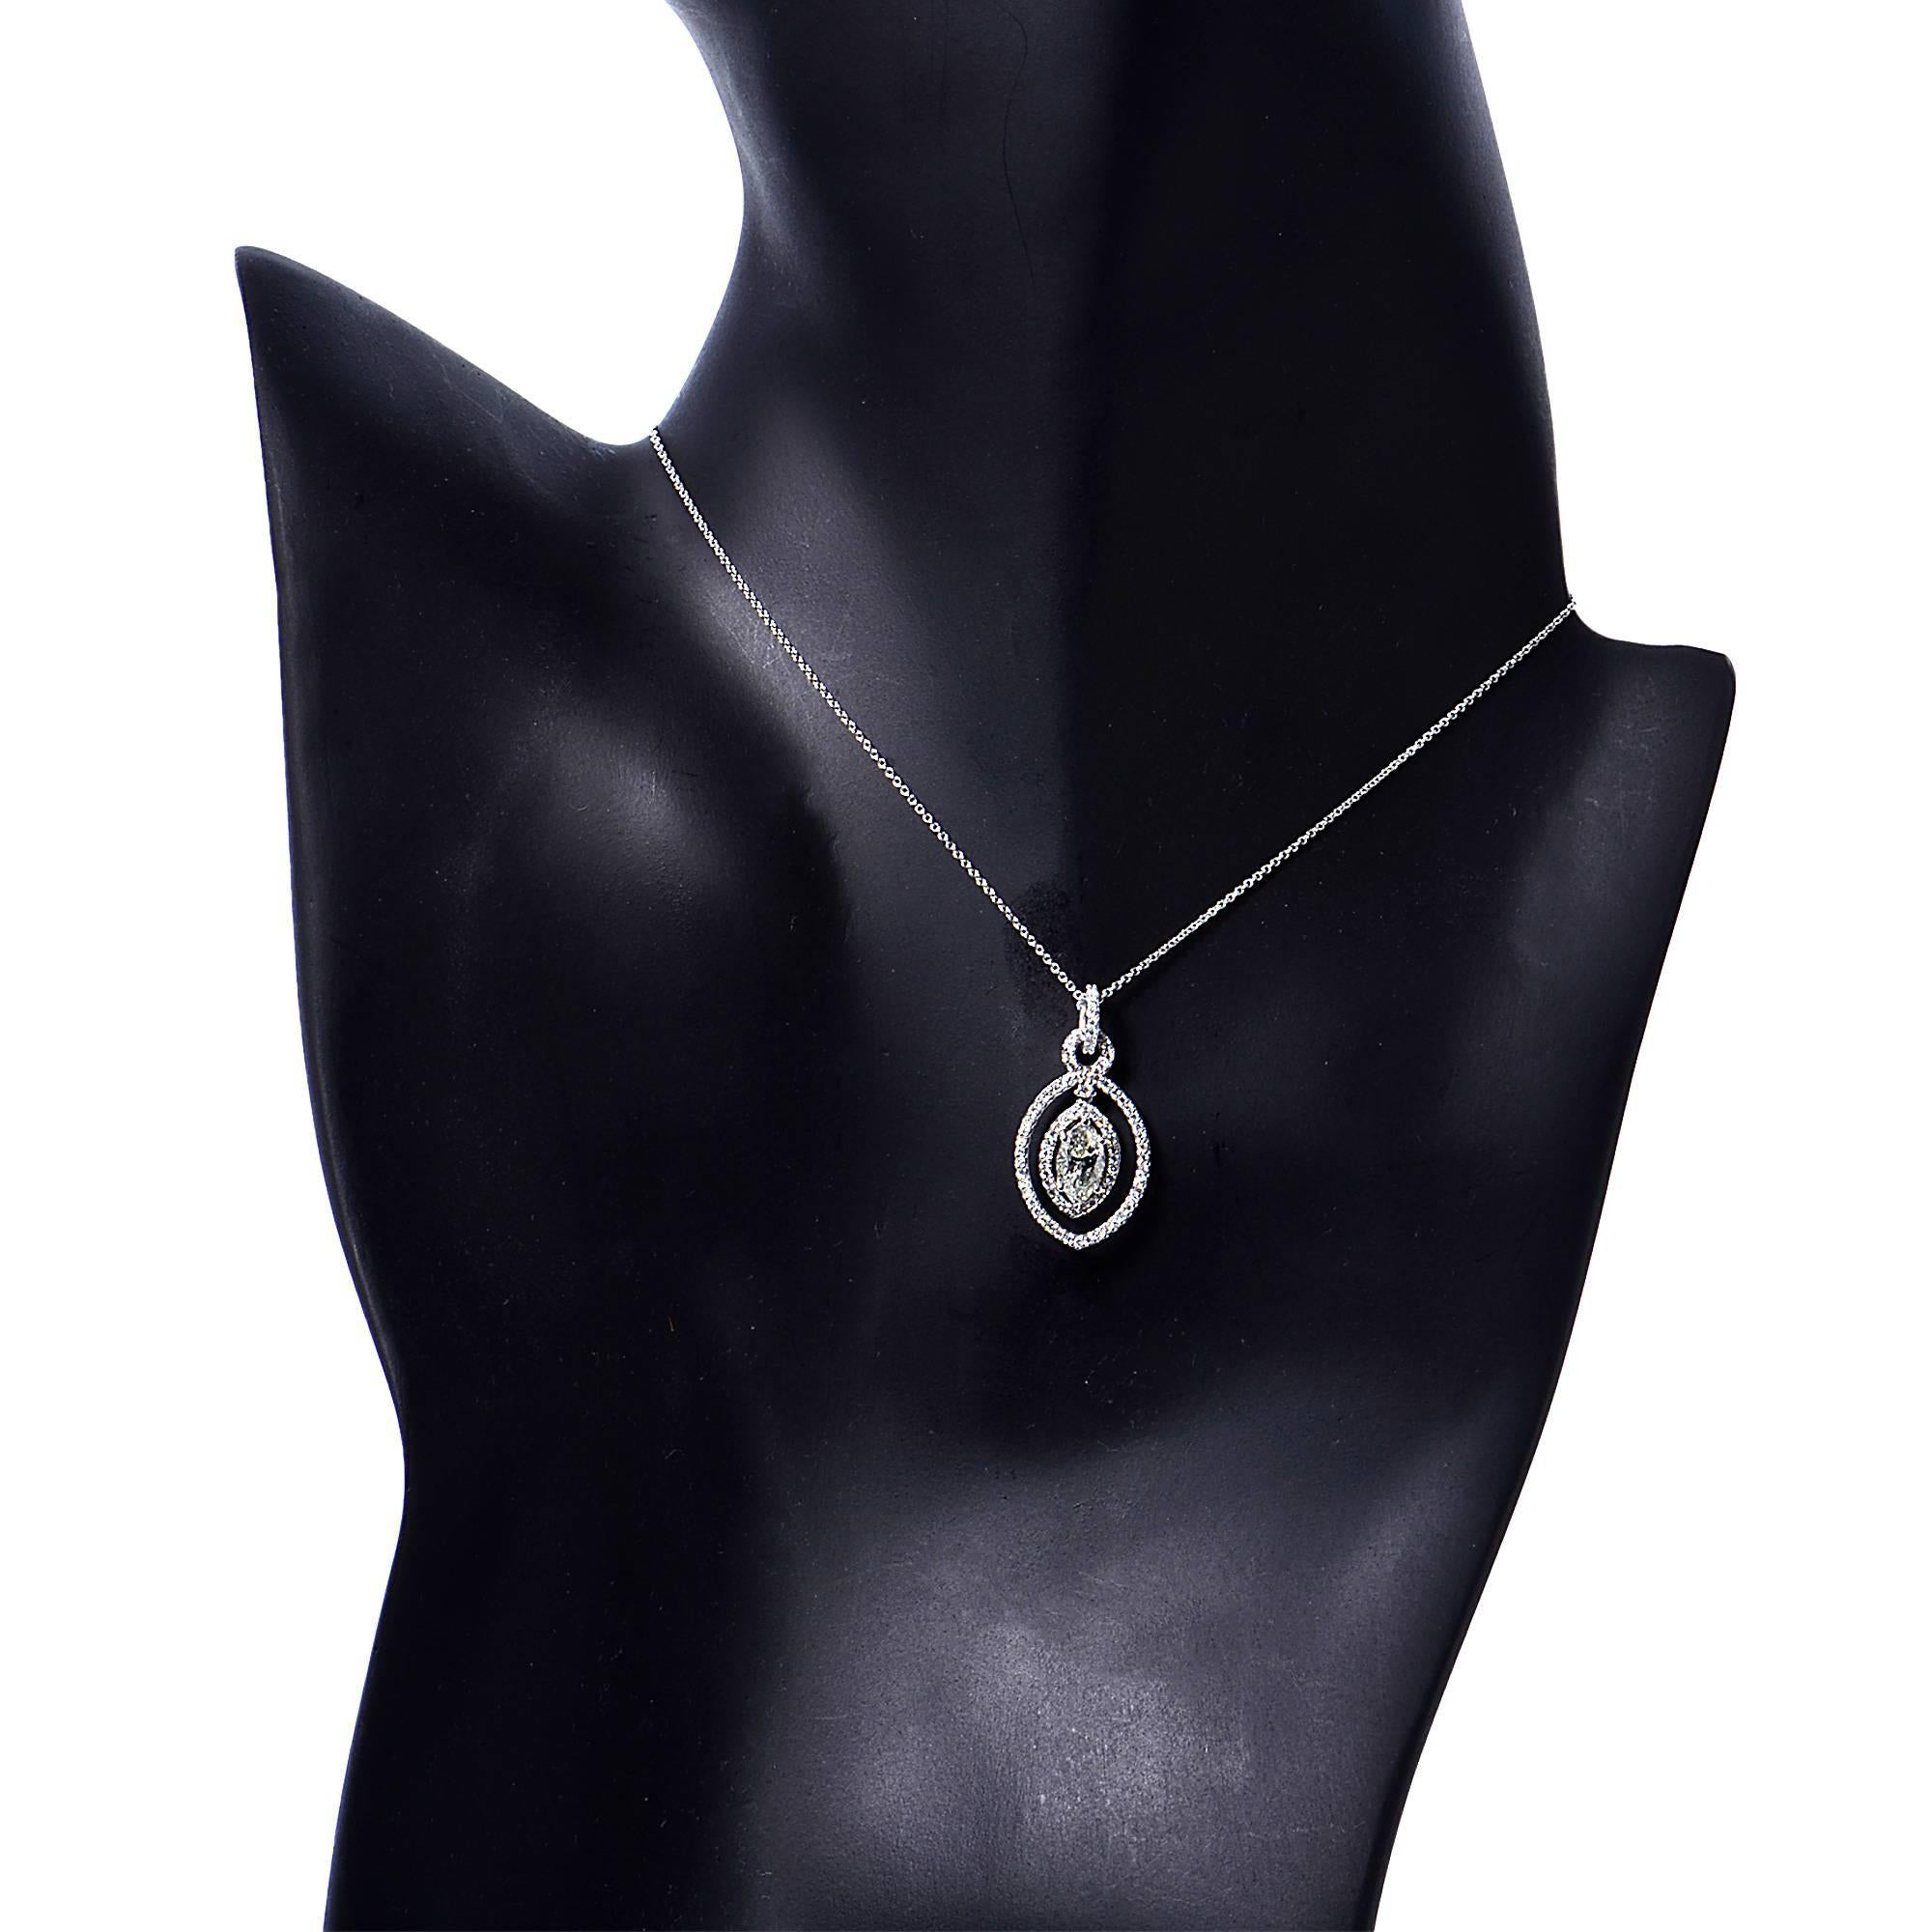 18k white gold necklace and pendant featuring a marquise cut diamond weighing 1.01cts, J color, SI clarity, accented by 93 round brilliant cut diamonds weighing .64cts total, H color, VS clarity.

Metal weight: 3.52 grams

This diamond pendant